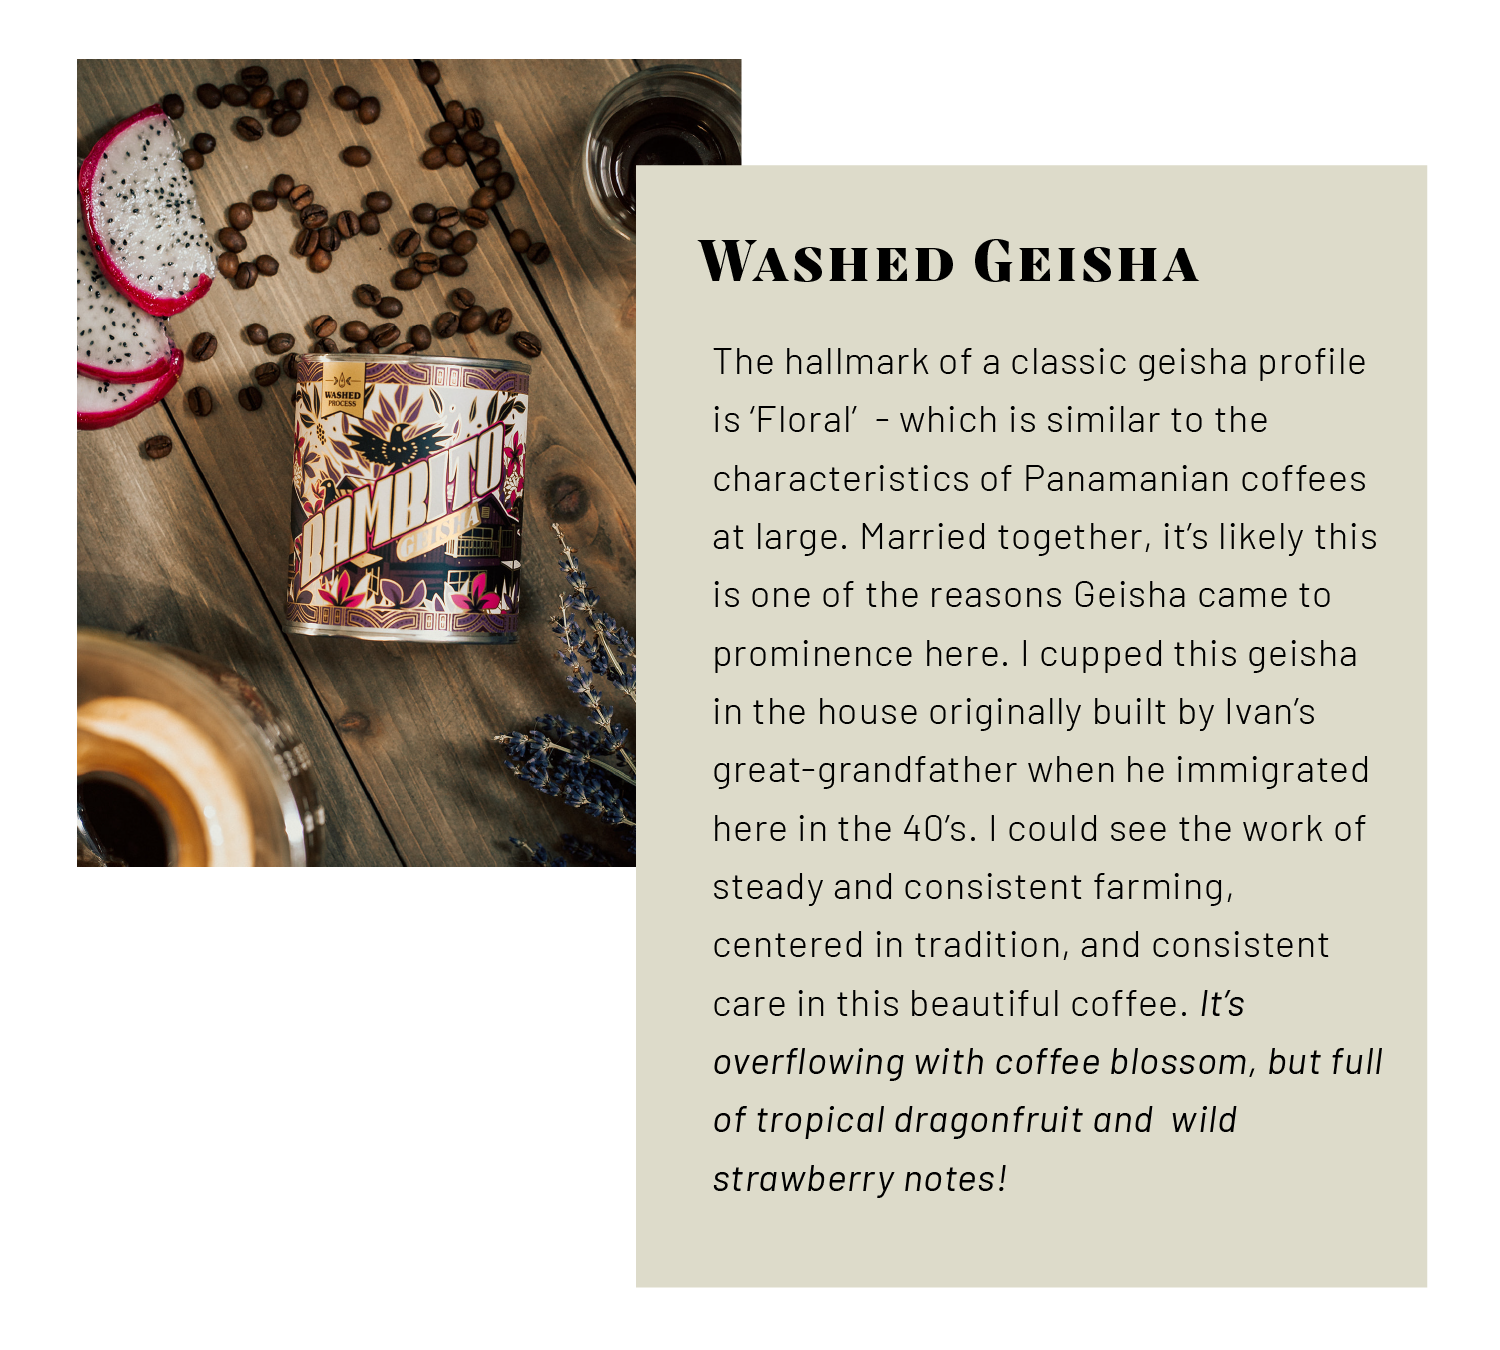 Washed Geisha - The hallmark of a classic geisha profile is 'Floral'  - which is similar to the characteristics of Panamanian coffees at large. Married together, it's likely this is one of the reasons Geisha came to prominence here. I cupped this geisha in the house originally built by Ivan's great-grandfather when he immigrated here in the 40's. I could see the work of steady and consistent farming, centered in tradition, and consistent care in this beautiful coffee. It's  overflowing with coffee blossom, but full  of tropical dragonfruit and  wild strawberry notes!